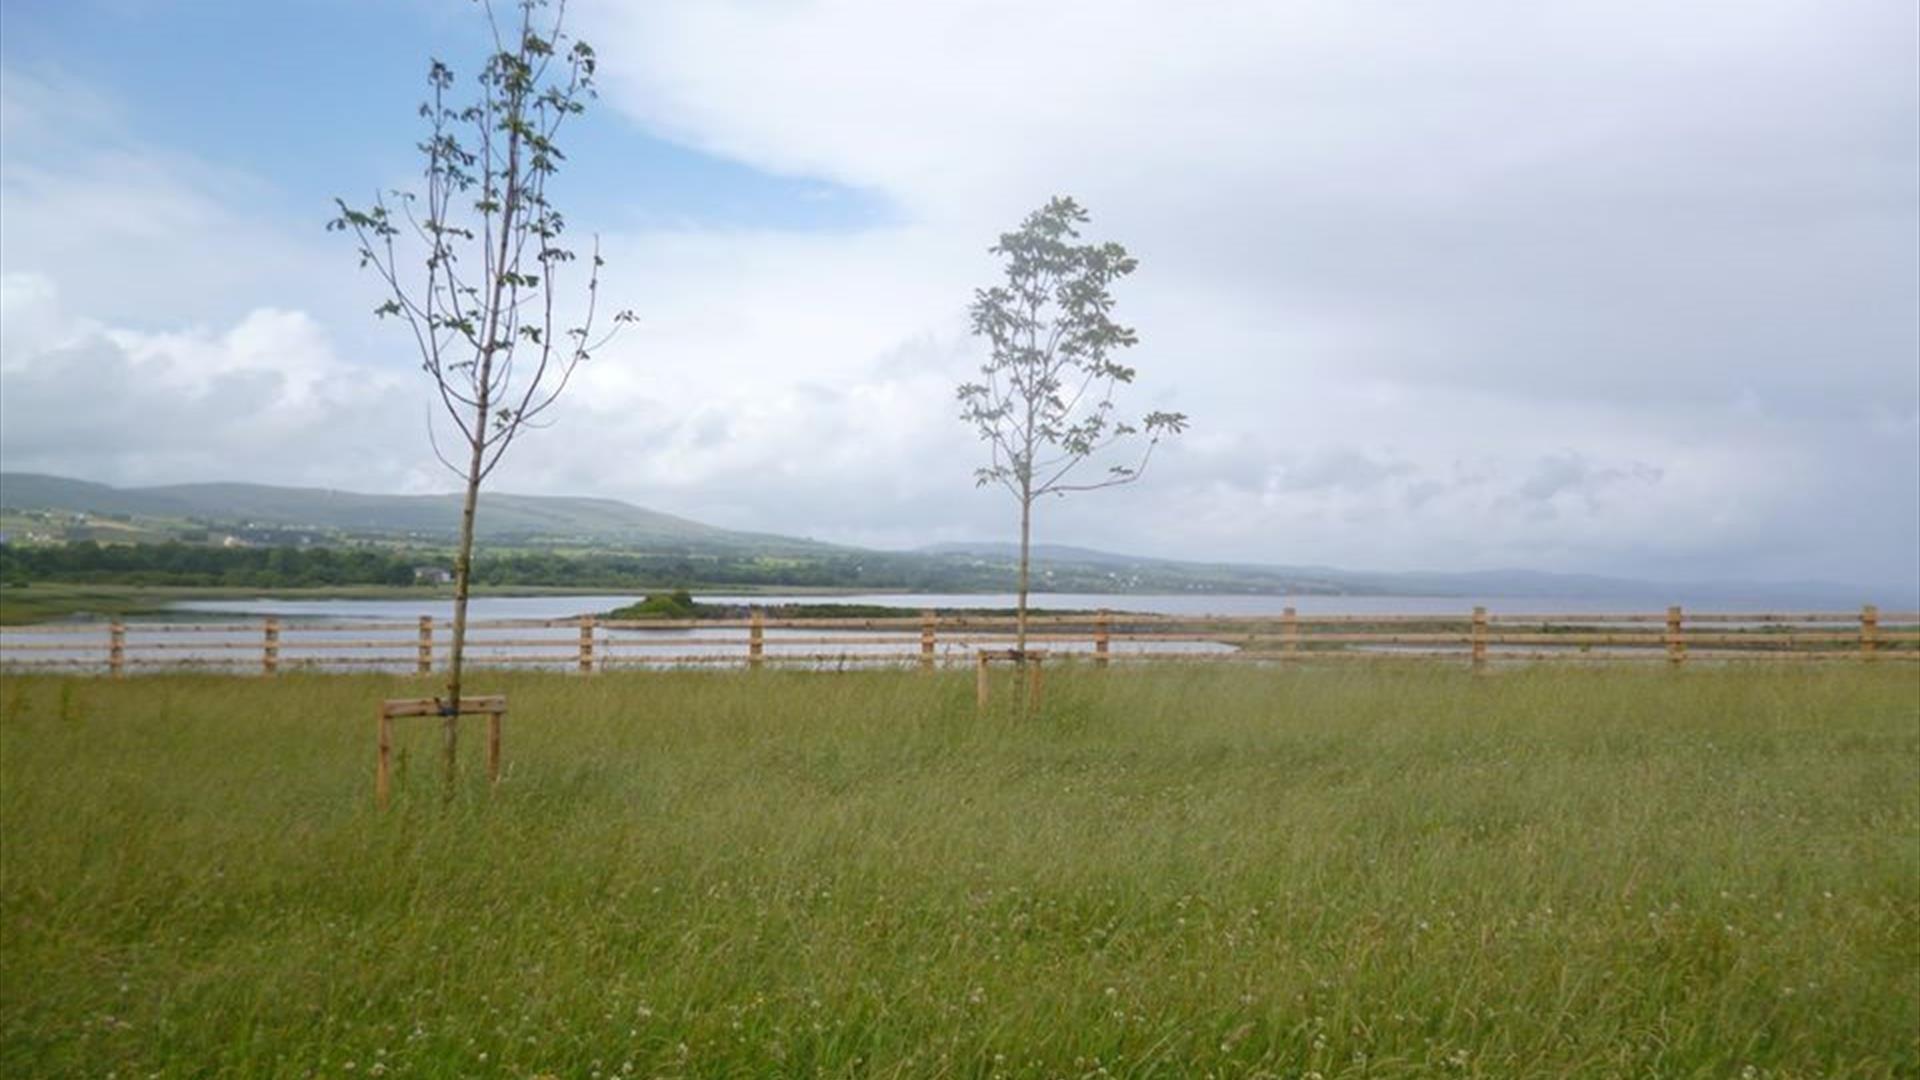 Views over Lough Foyle from Culmore Country Park